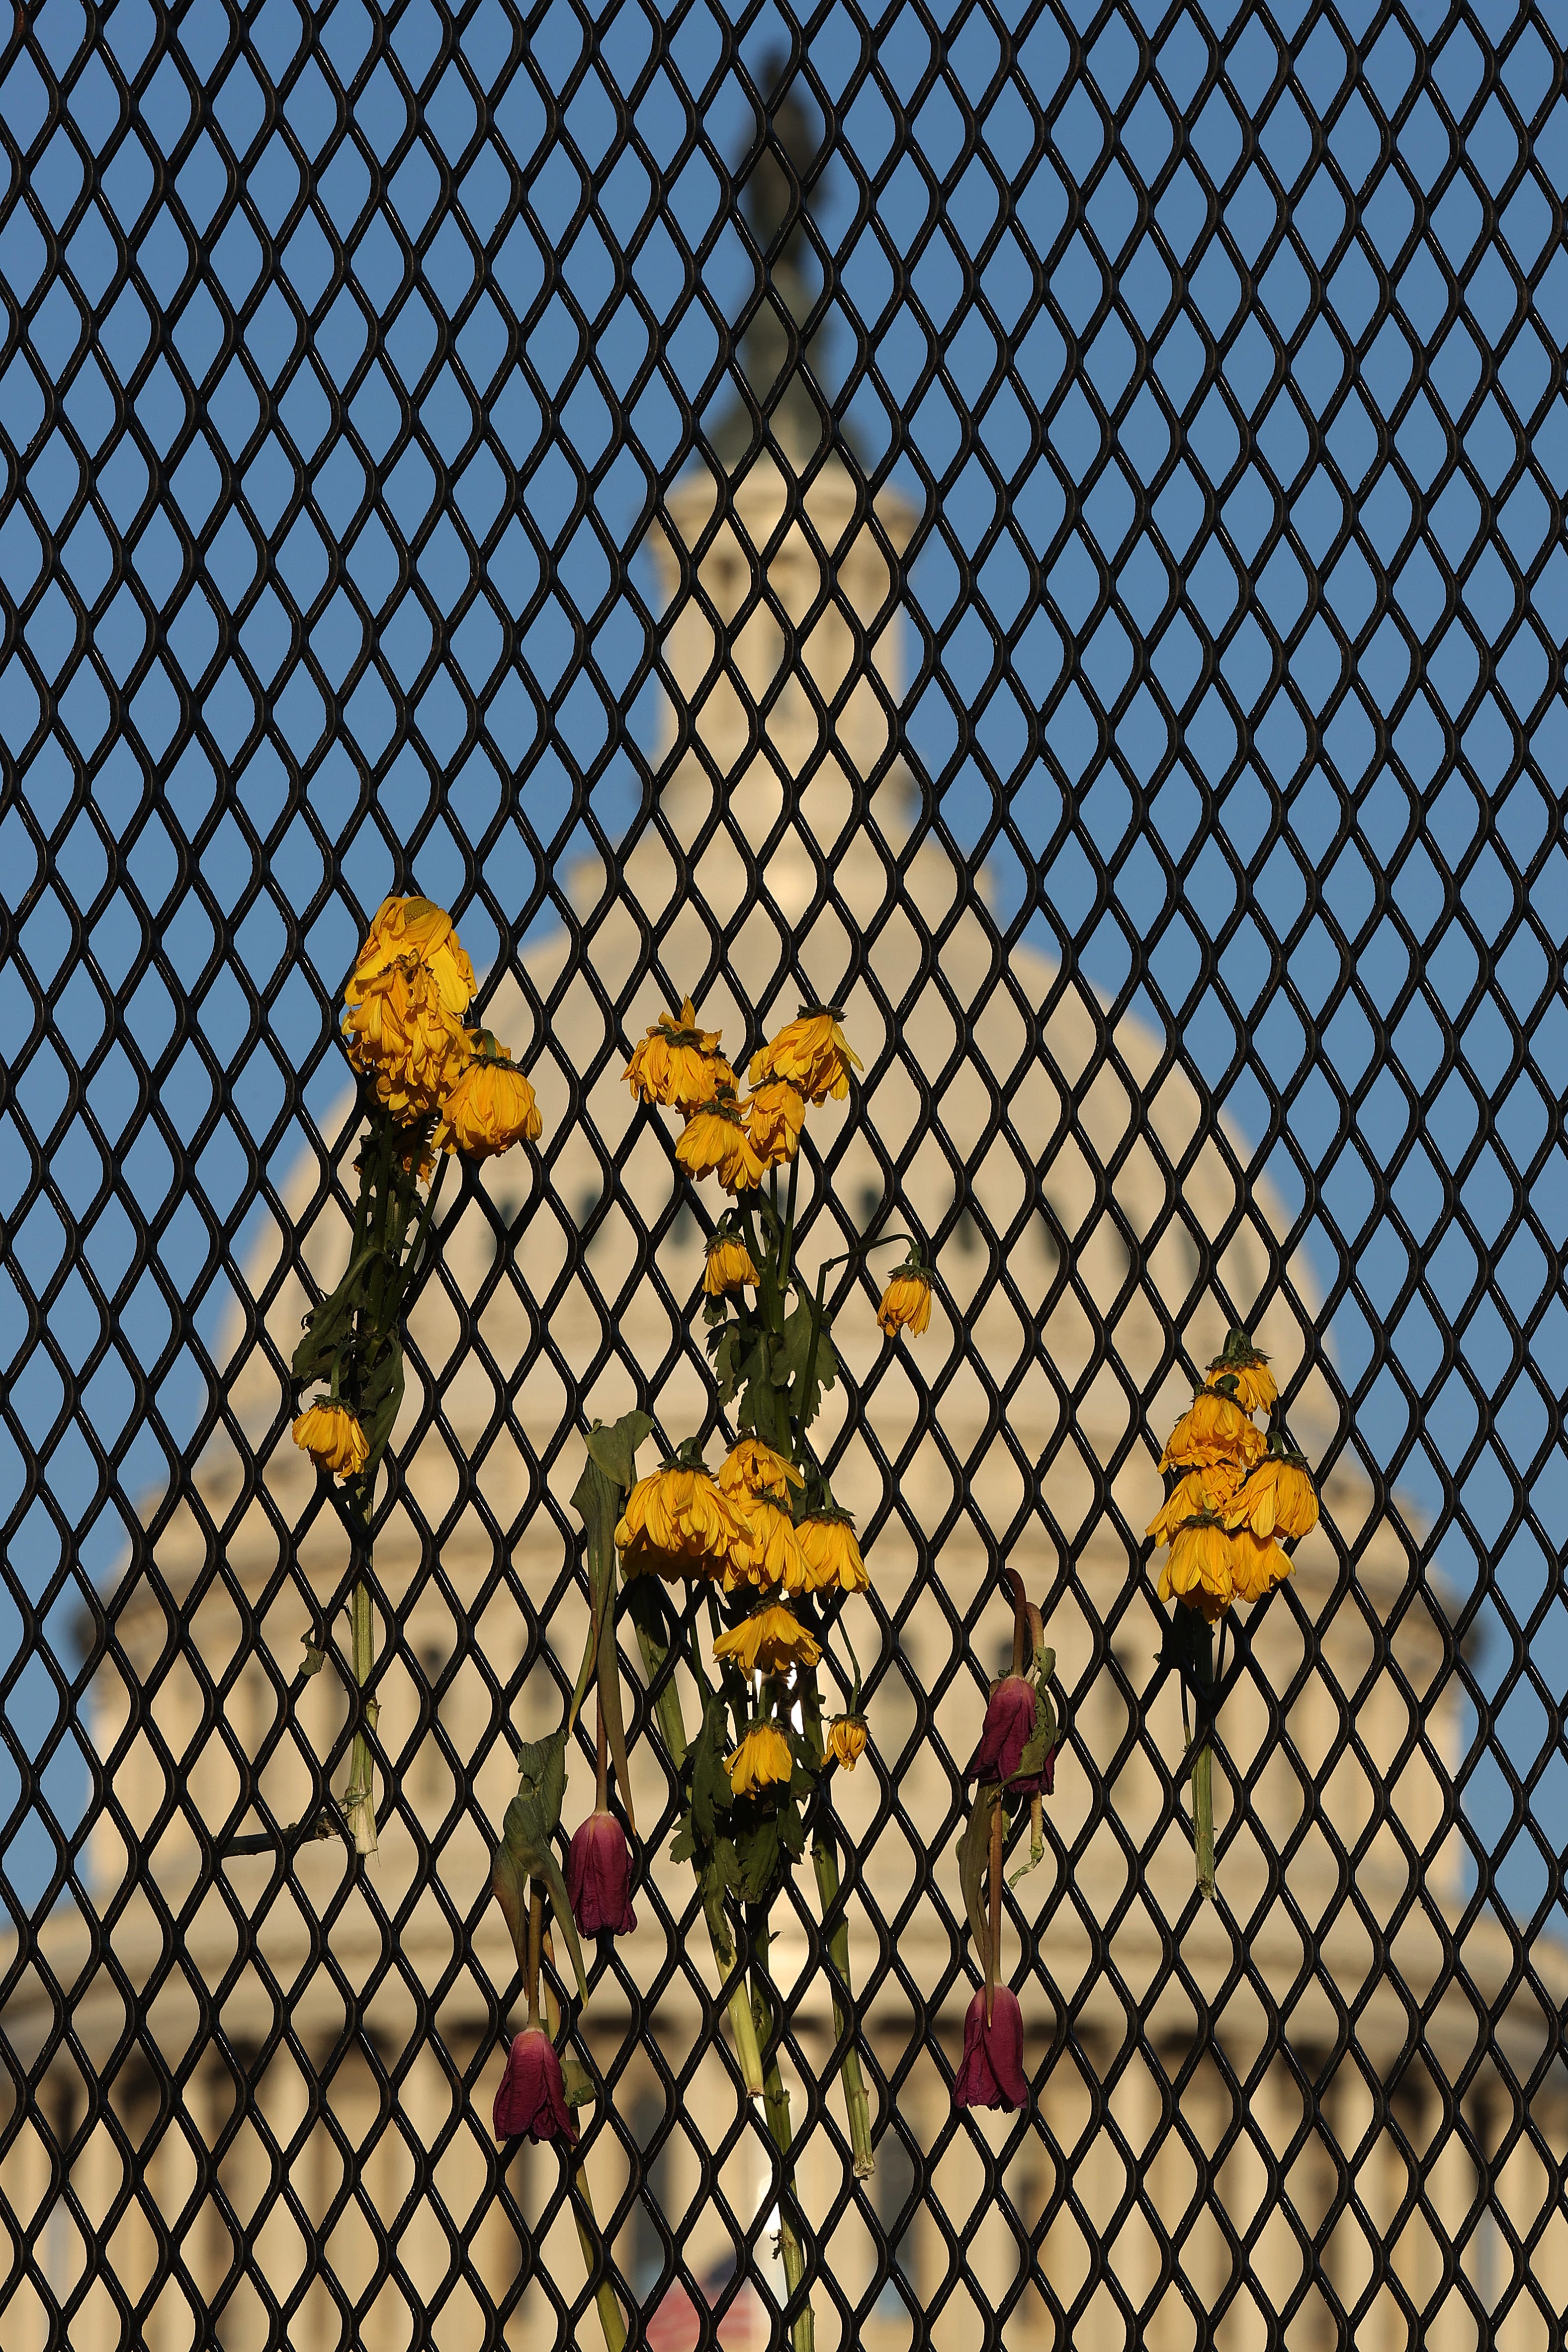 Flowers are woven into the eight-foot-tall steel security fence that continues to encircle the U.S. Capitol on April 05, 2021, in Washington, D.C. U.S. Capitol Police Officer William "Billy" Evans was killed when he and another officer were struck by a vehicle at the security perimeter on April 2.